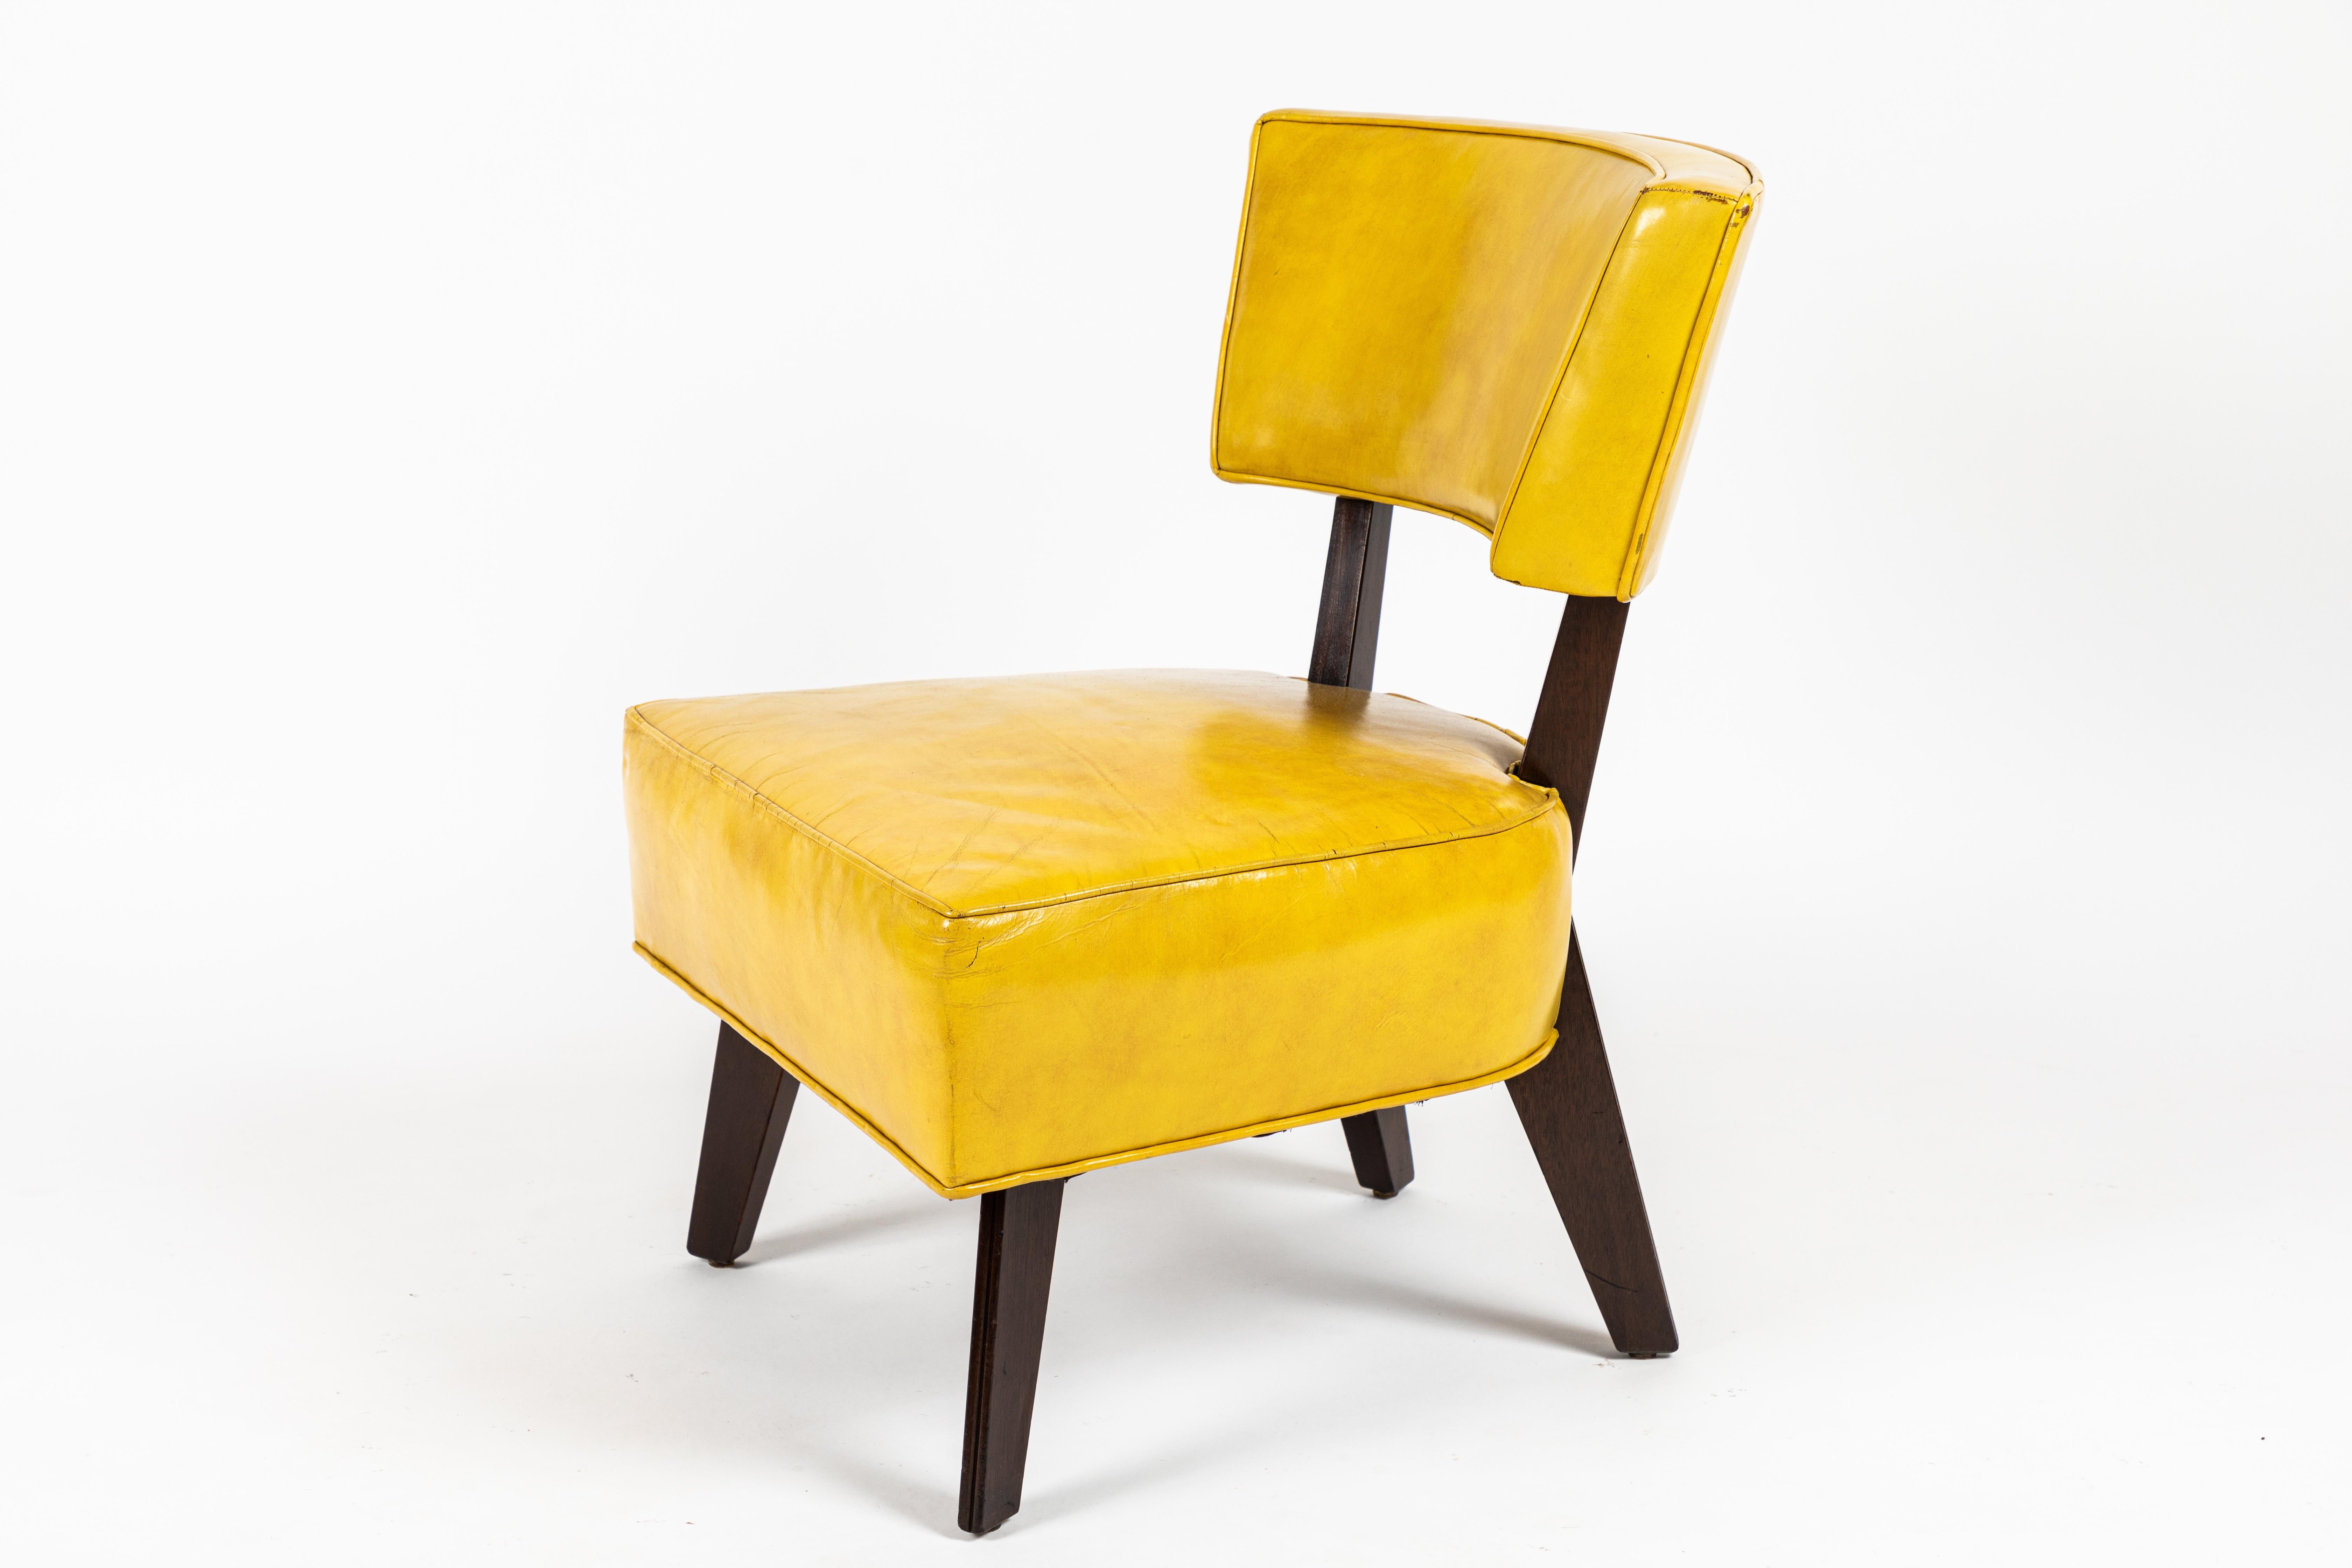 Pair of Low Chairs Designed by William Haines 1